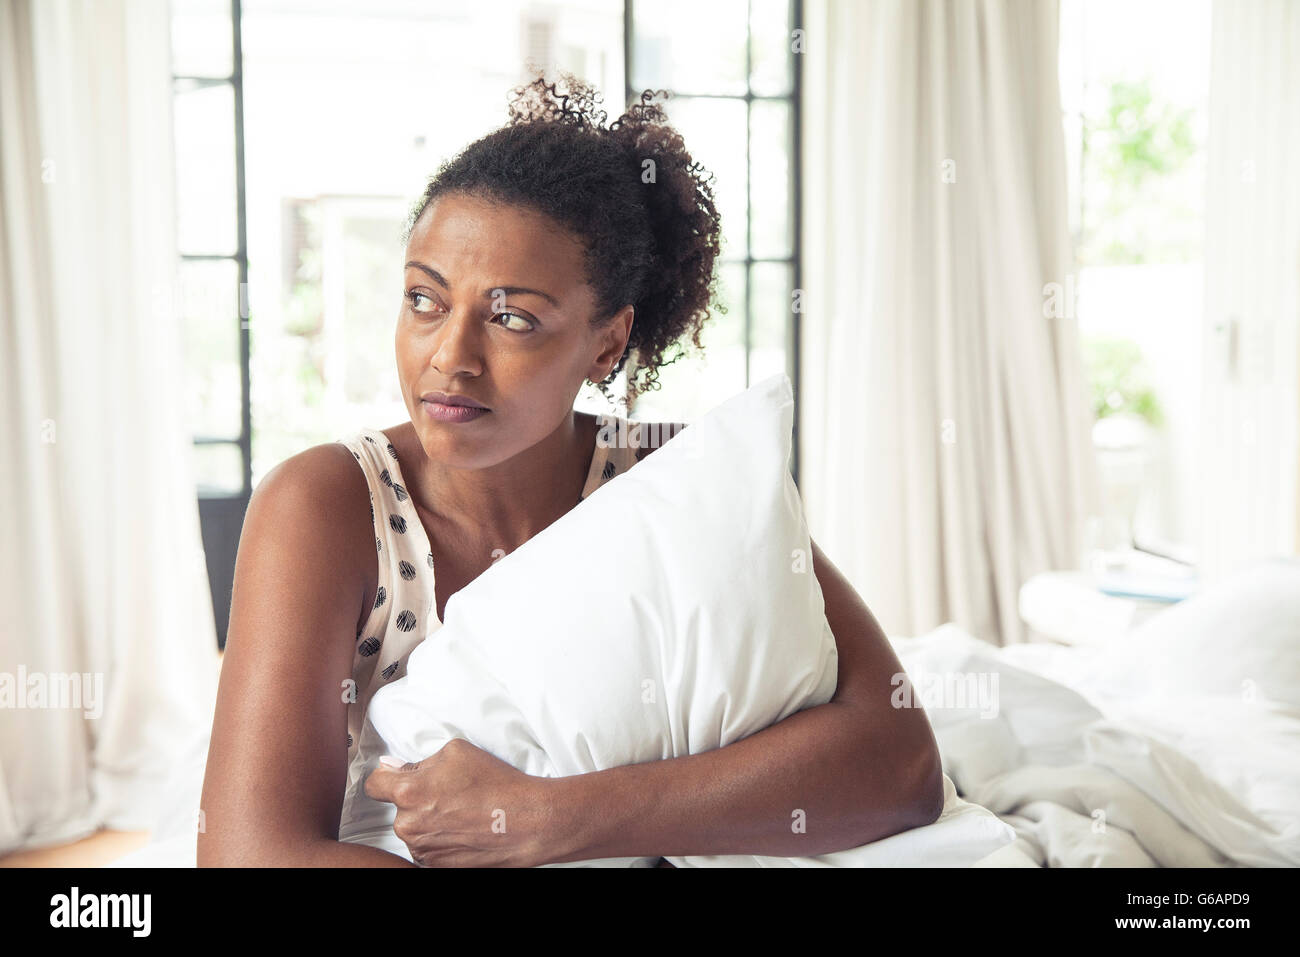 Woman hugging pillow on bed, portrait Stock Photo